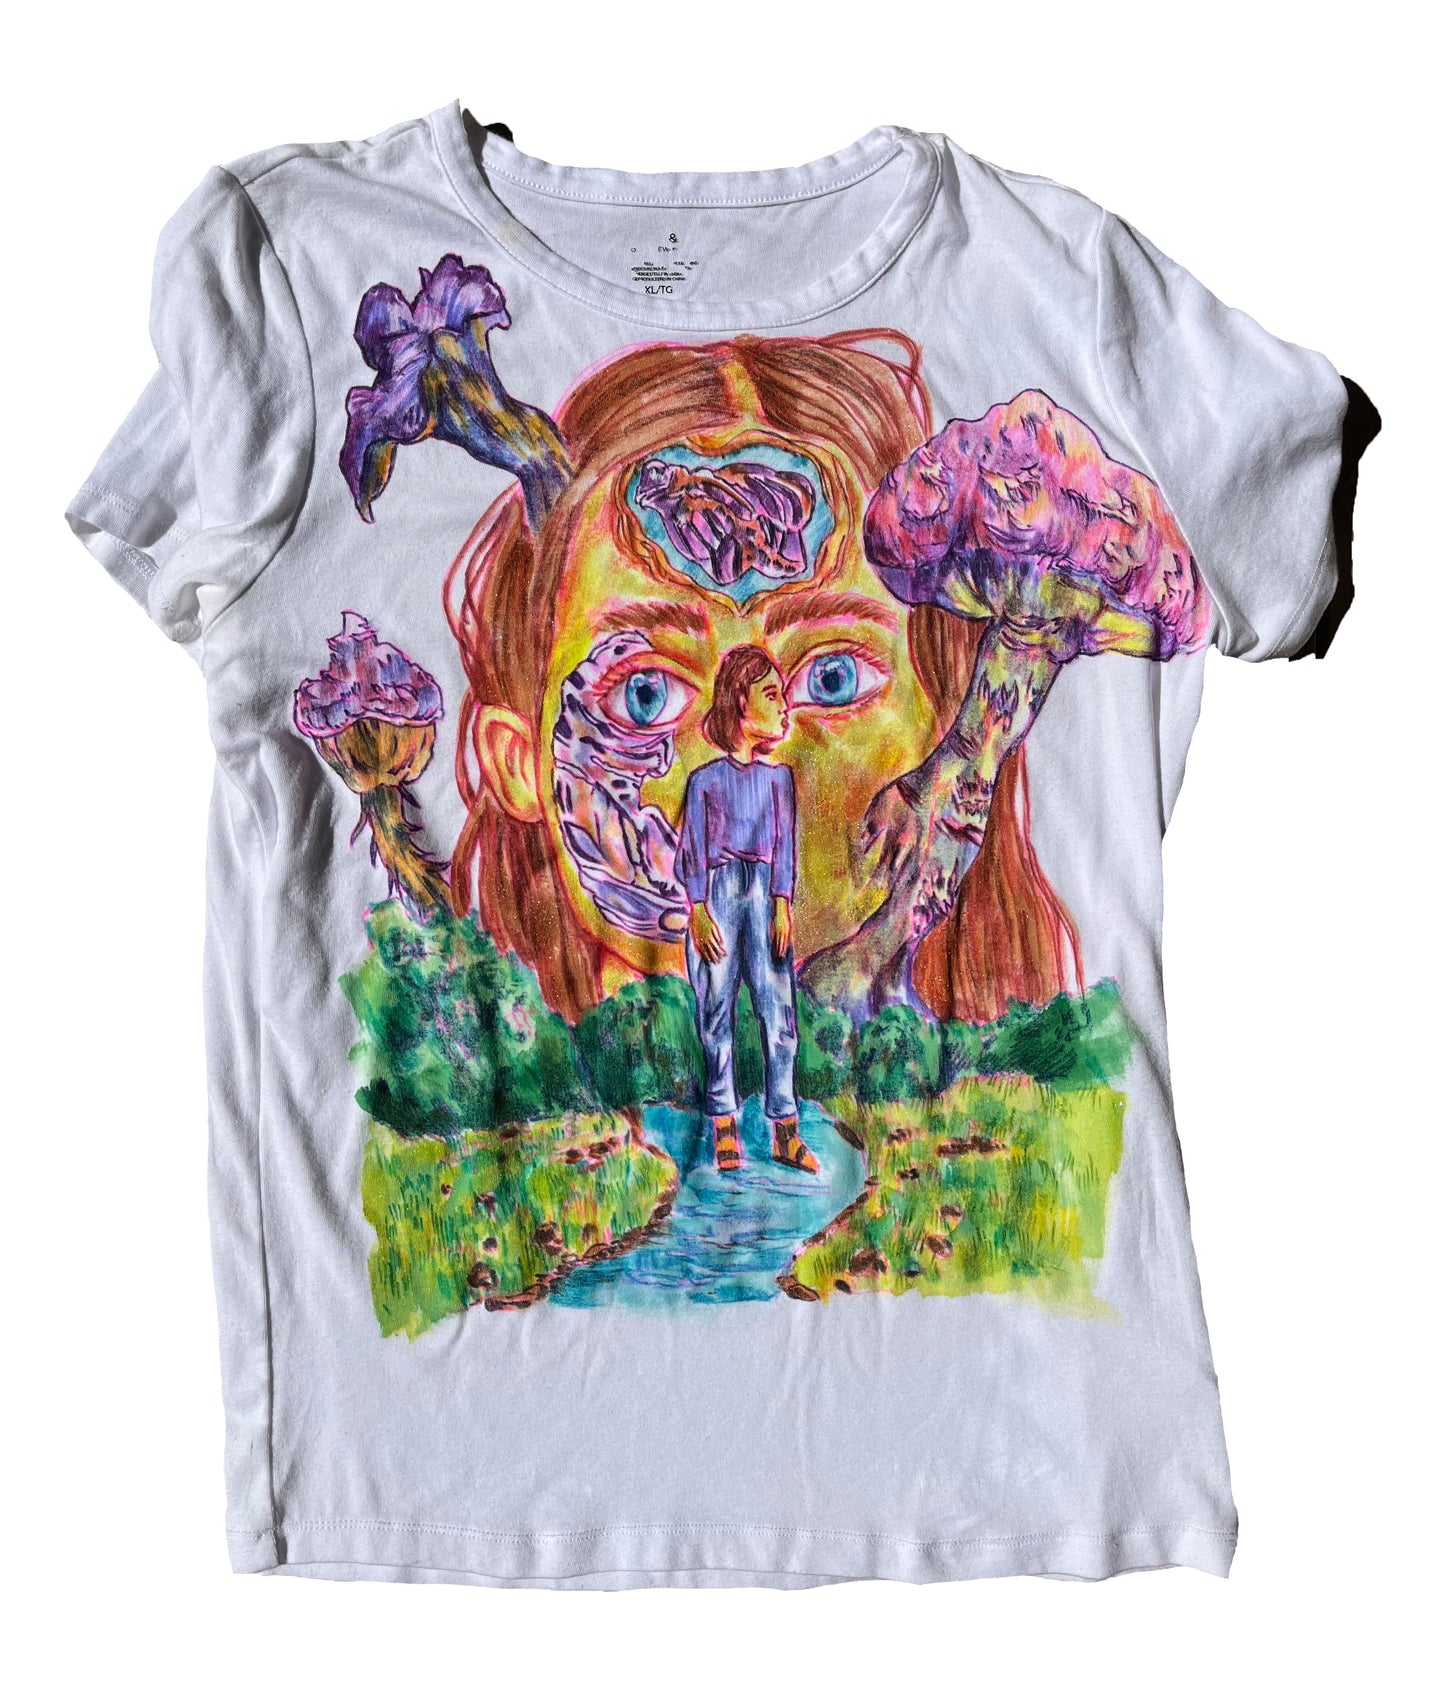 Girl in the World 1/1 Hand Drawn Graphic Tee Shirt